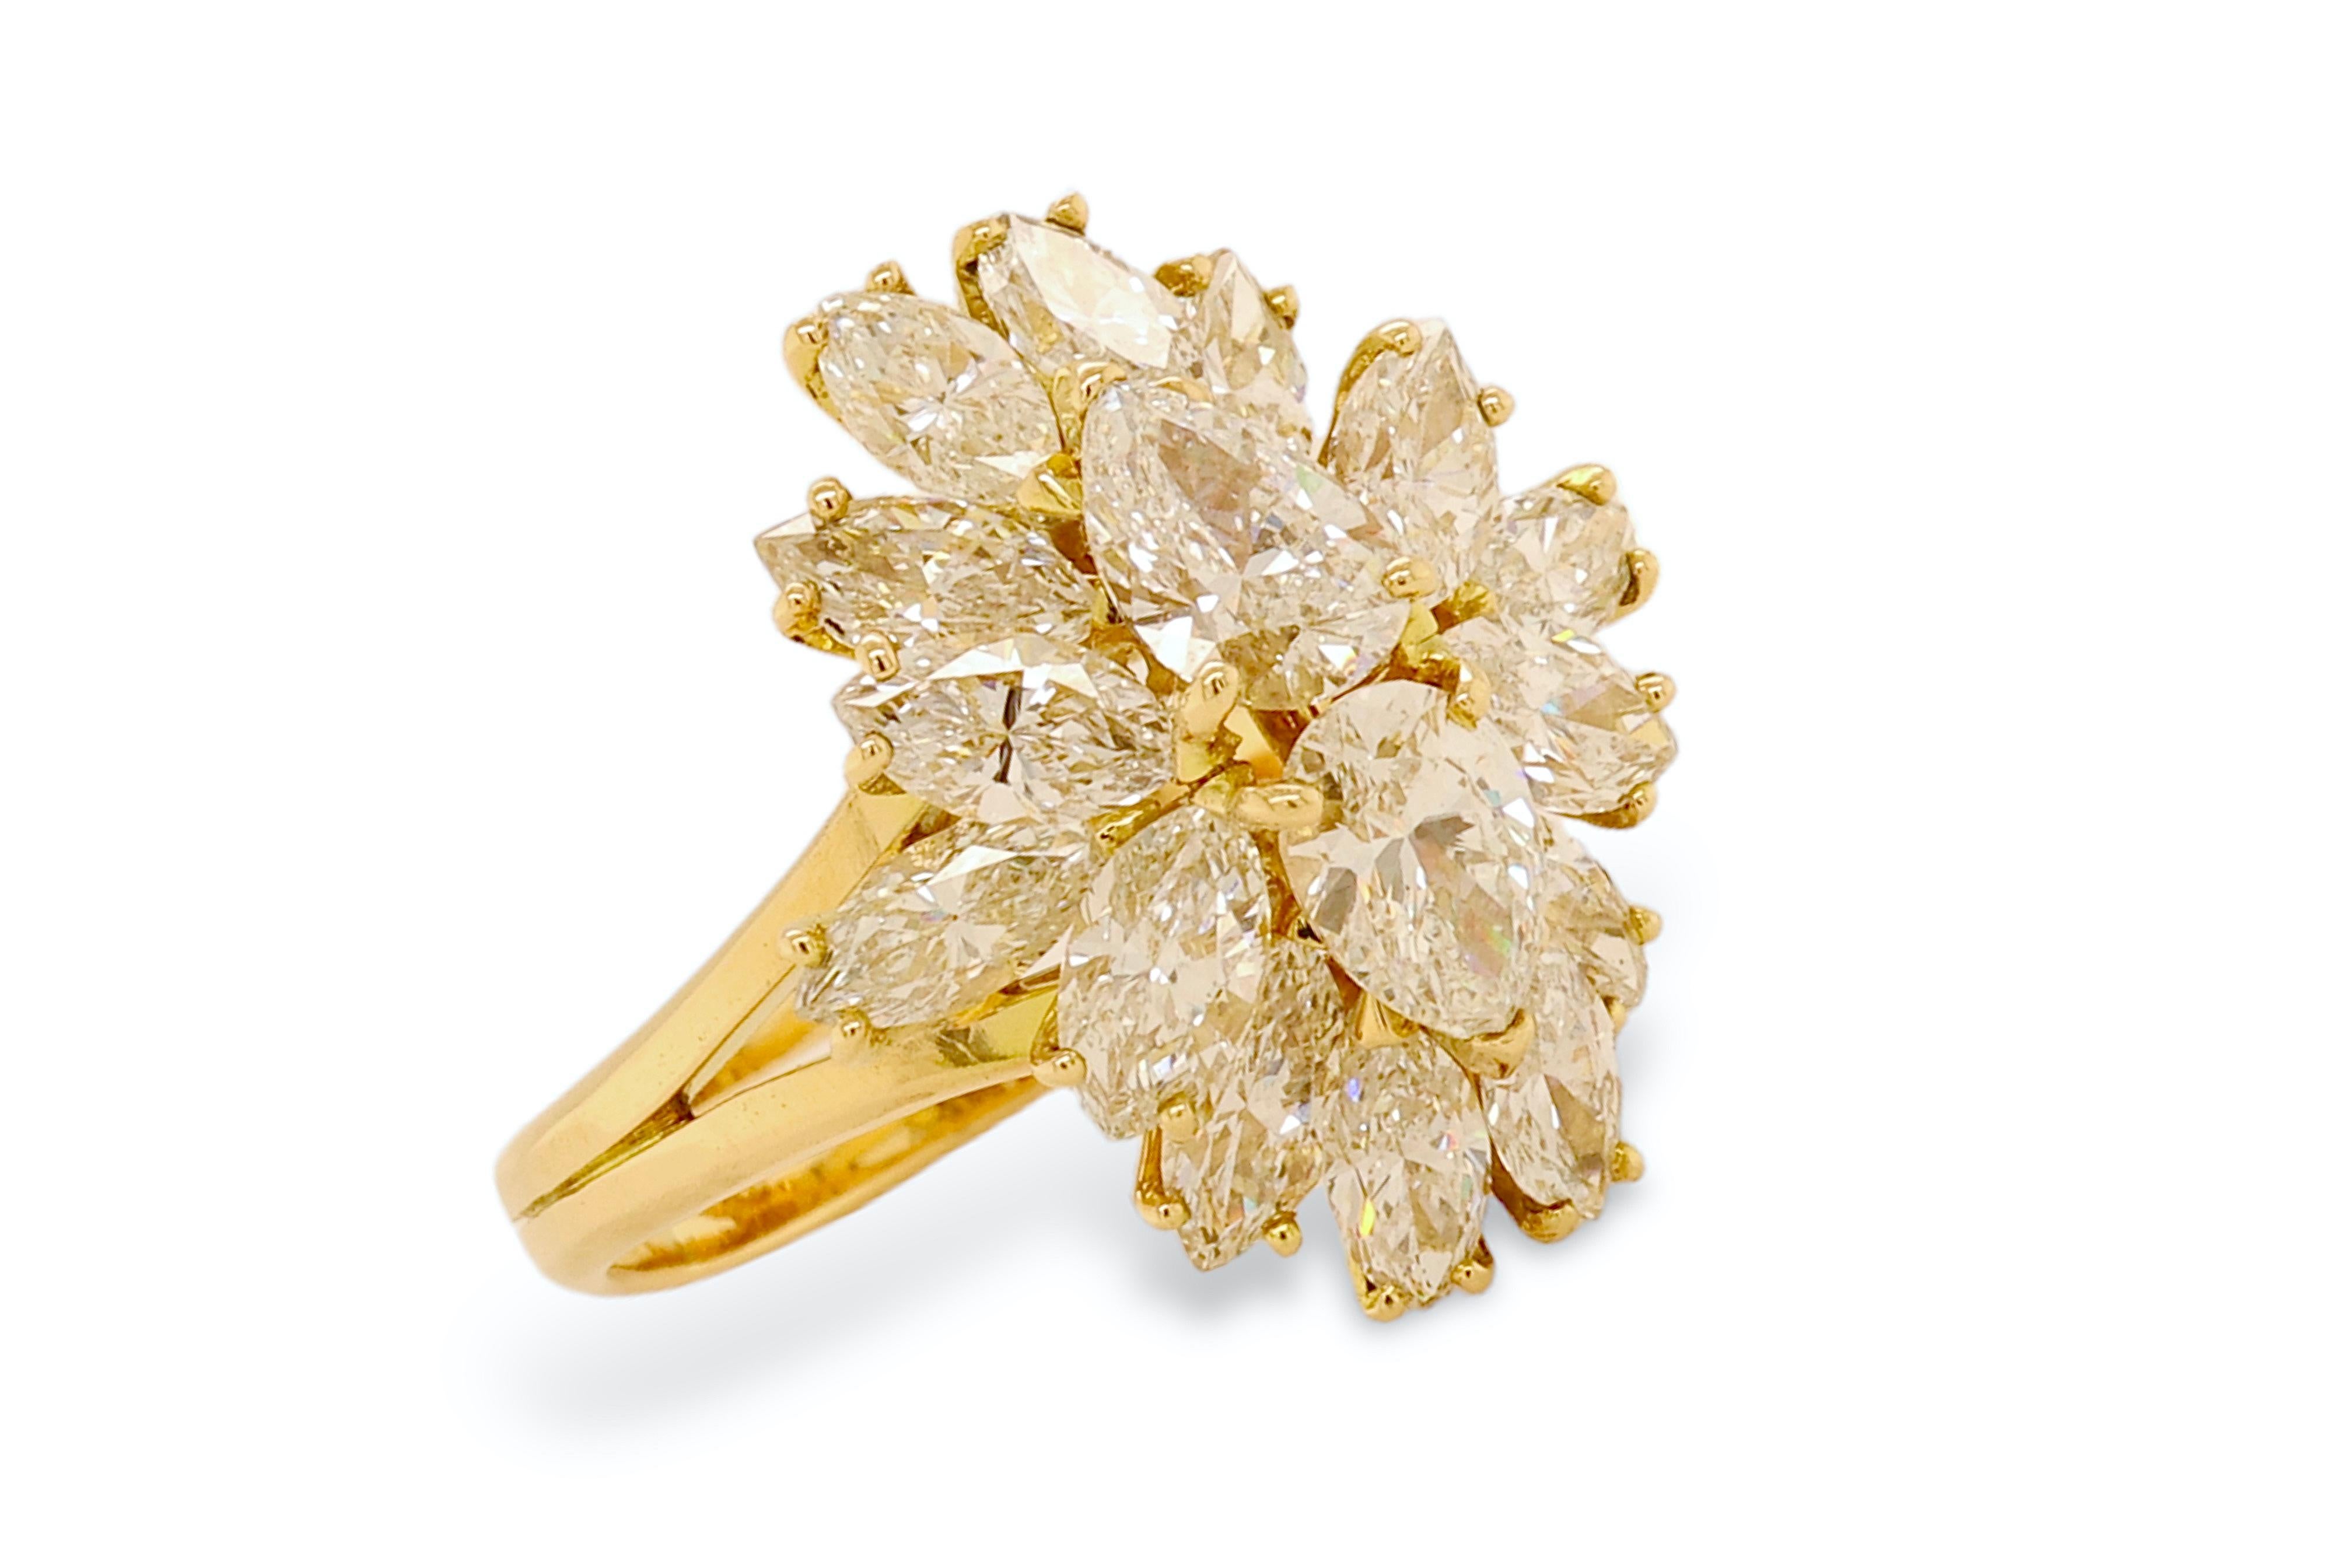 Asprey London 18kt. Yellow Gold Ring With 3.23 ct. Pear & Marquise Cut Diamonds For Sale 4